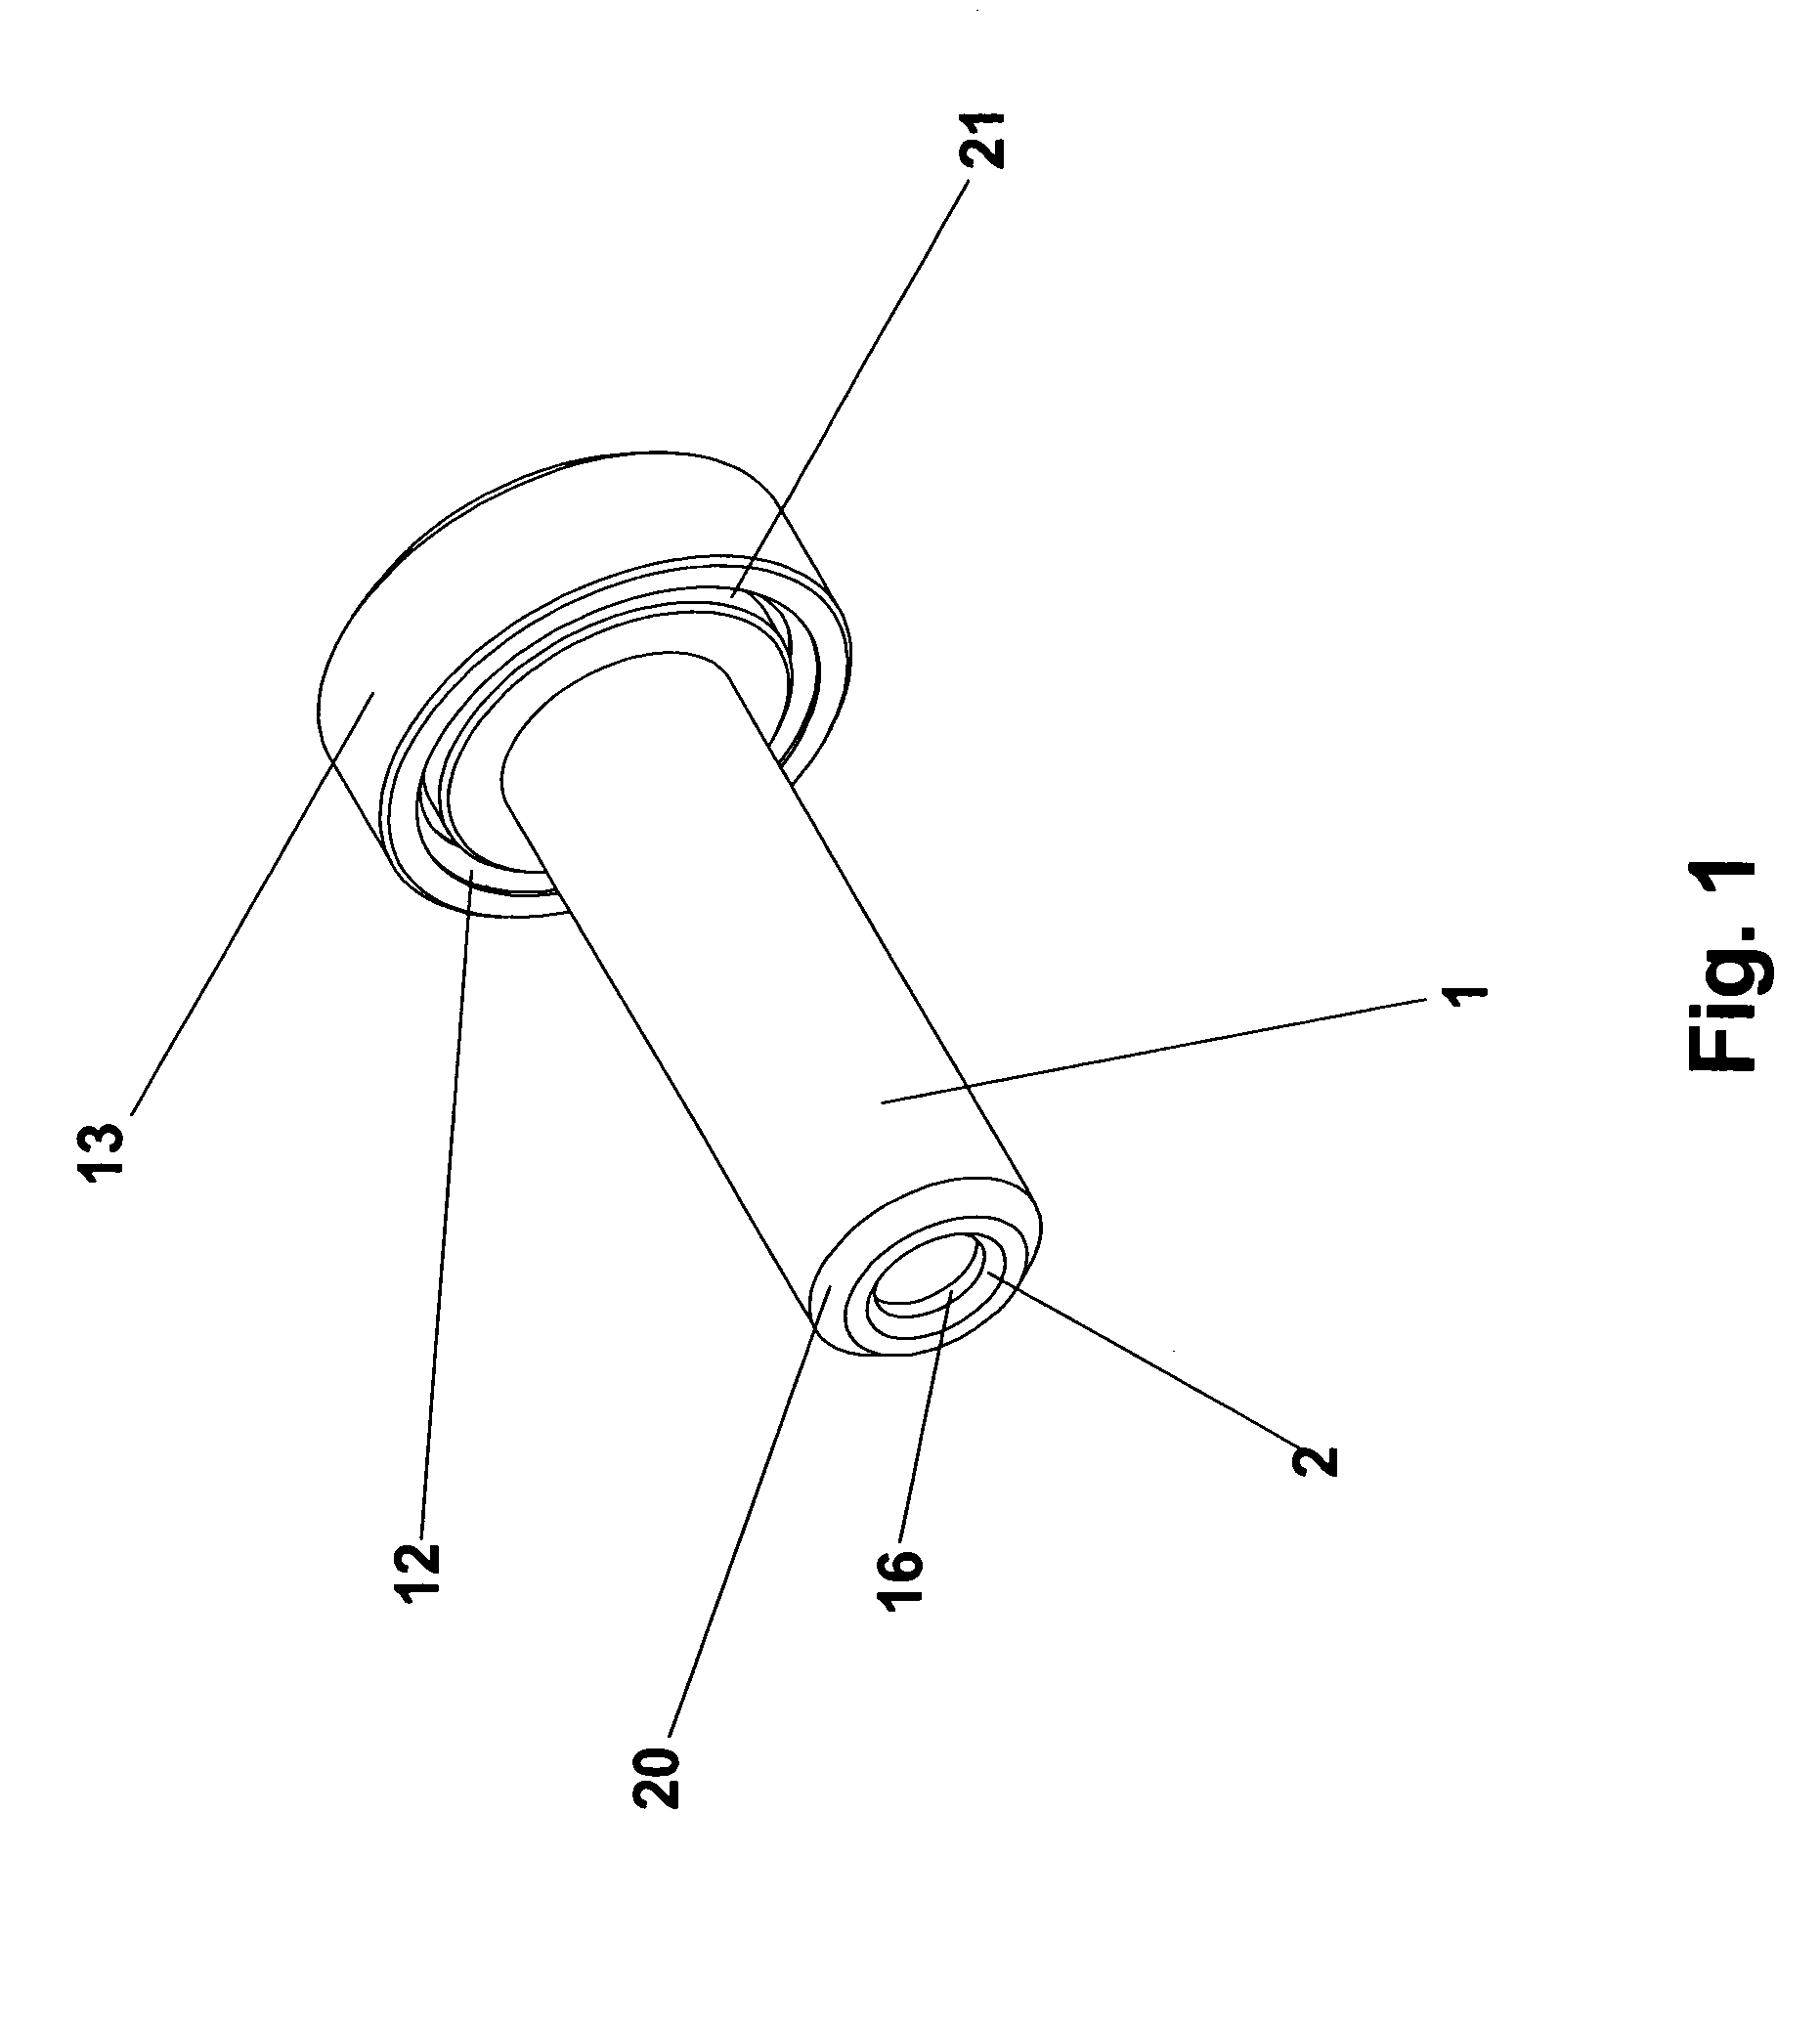 Spring loaded and self-locking cable gripping apparatus